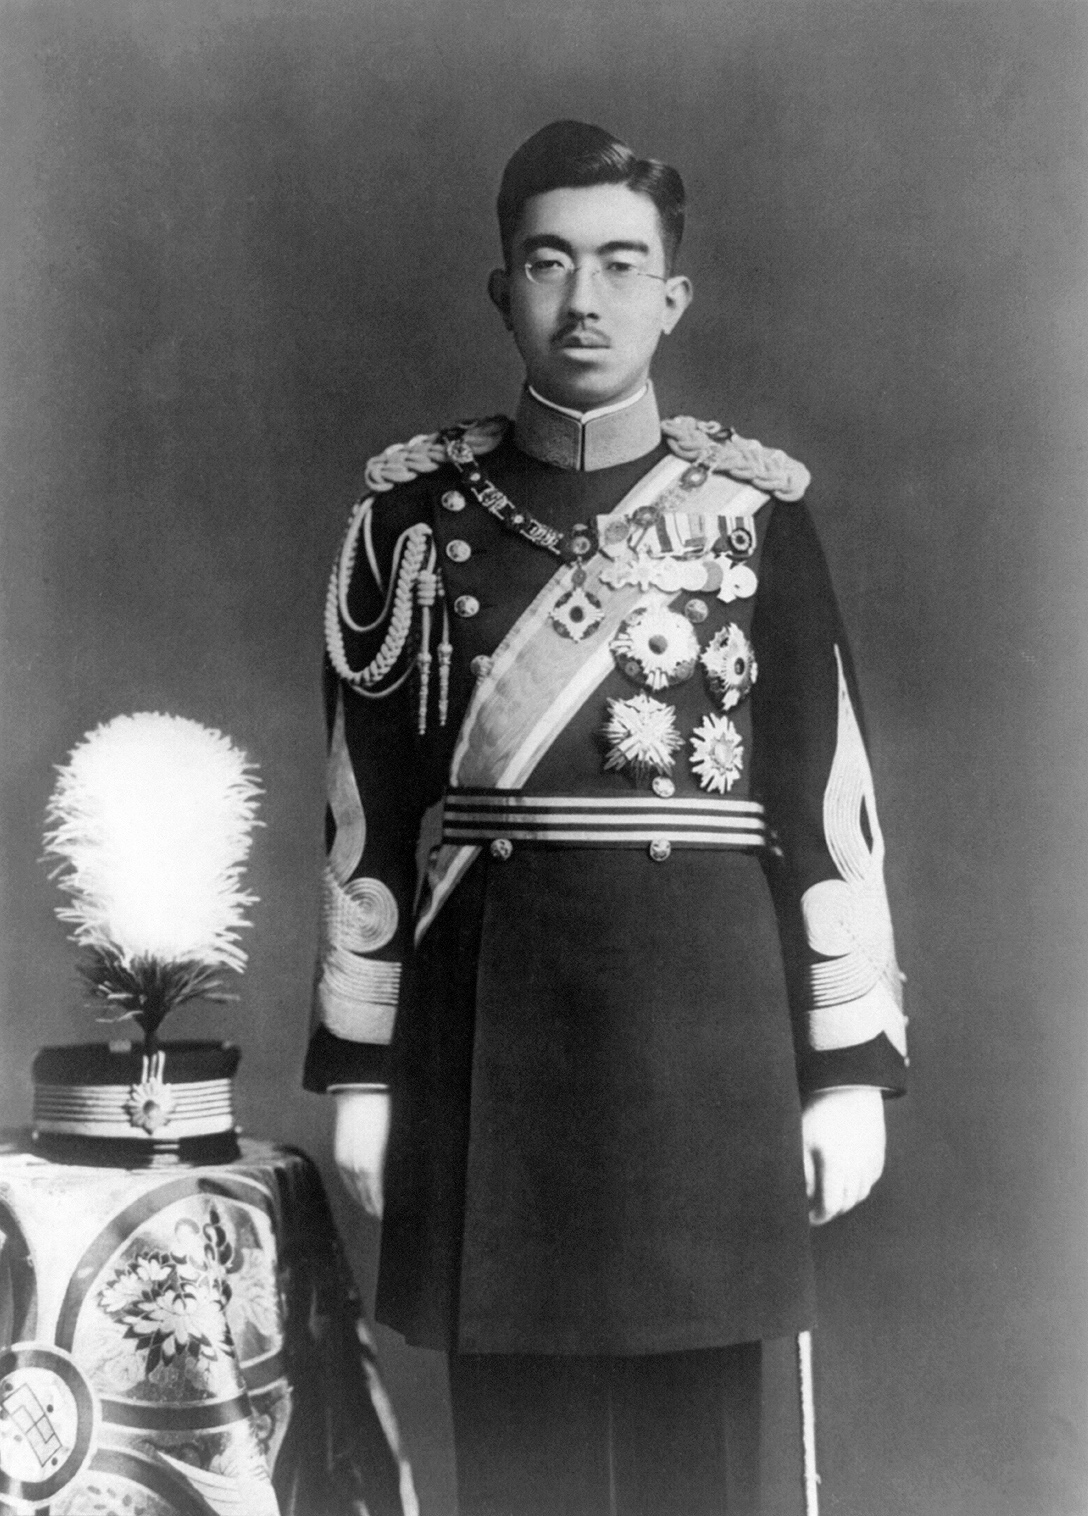 Because Hirohito, Emperor Shōwa, customarily defered to his military subordinates, the nation had no absolute decision maker.